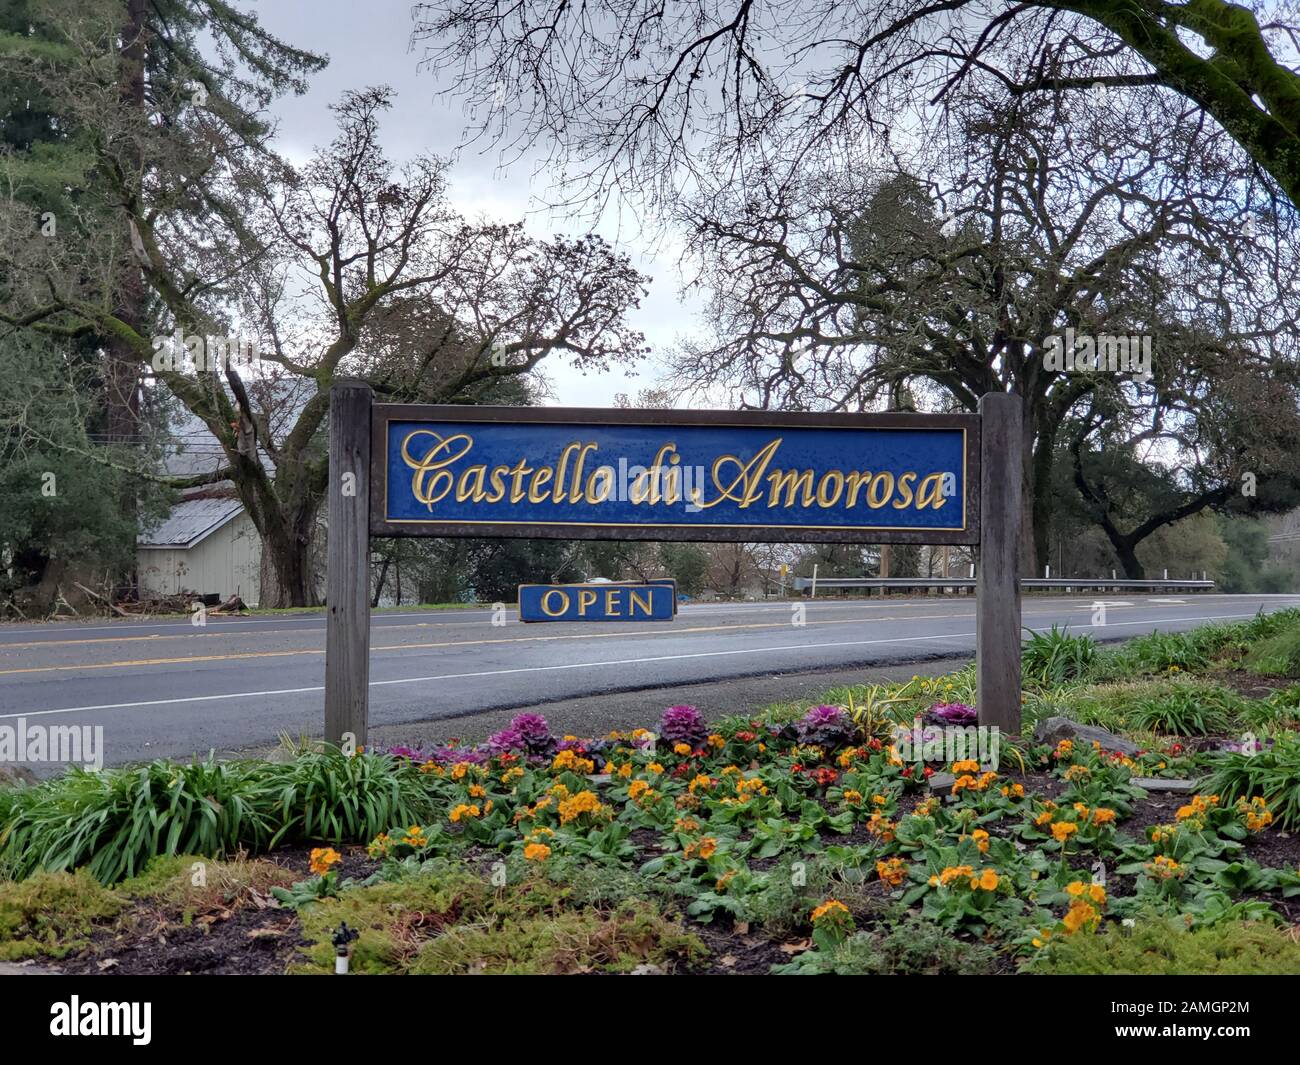 Sign at entrance to Castello di Amorosa, a vineyard in the Calistoga AVA of the Napa Valley in the California Wine Country, housed in a large reconstruction of a Tuscan castle, Calistoga, California, December 22, 2019. Castello di Amorosa is a popular tourist destination for visitors to the Napa Valley. () Stock Photo